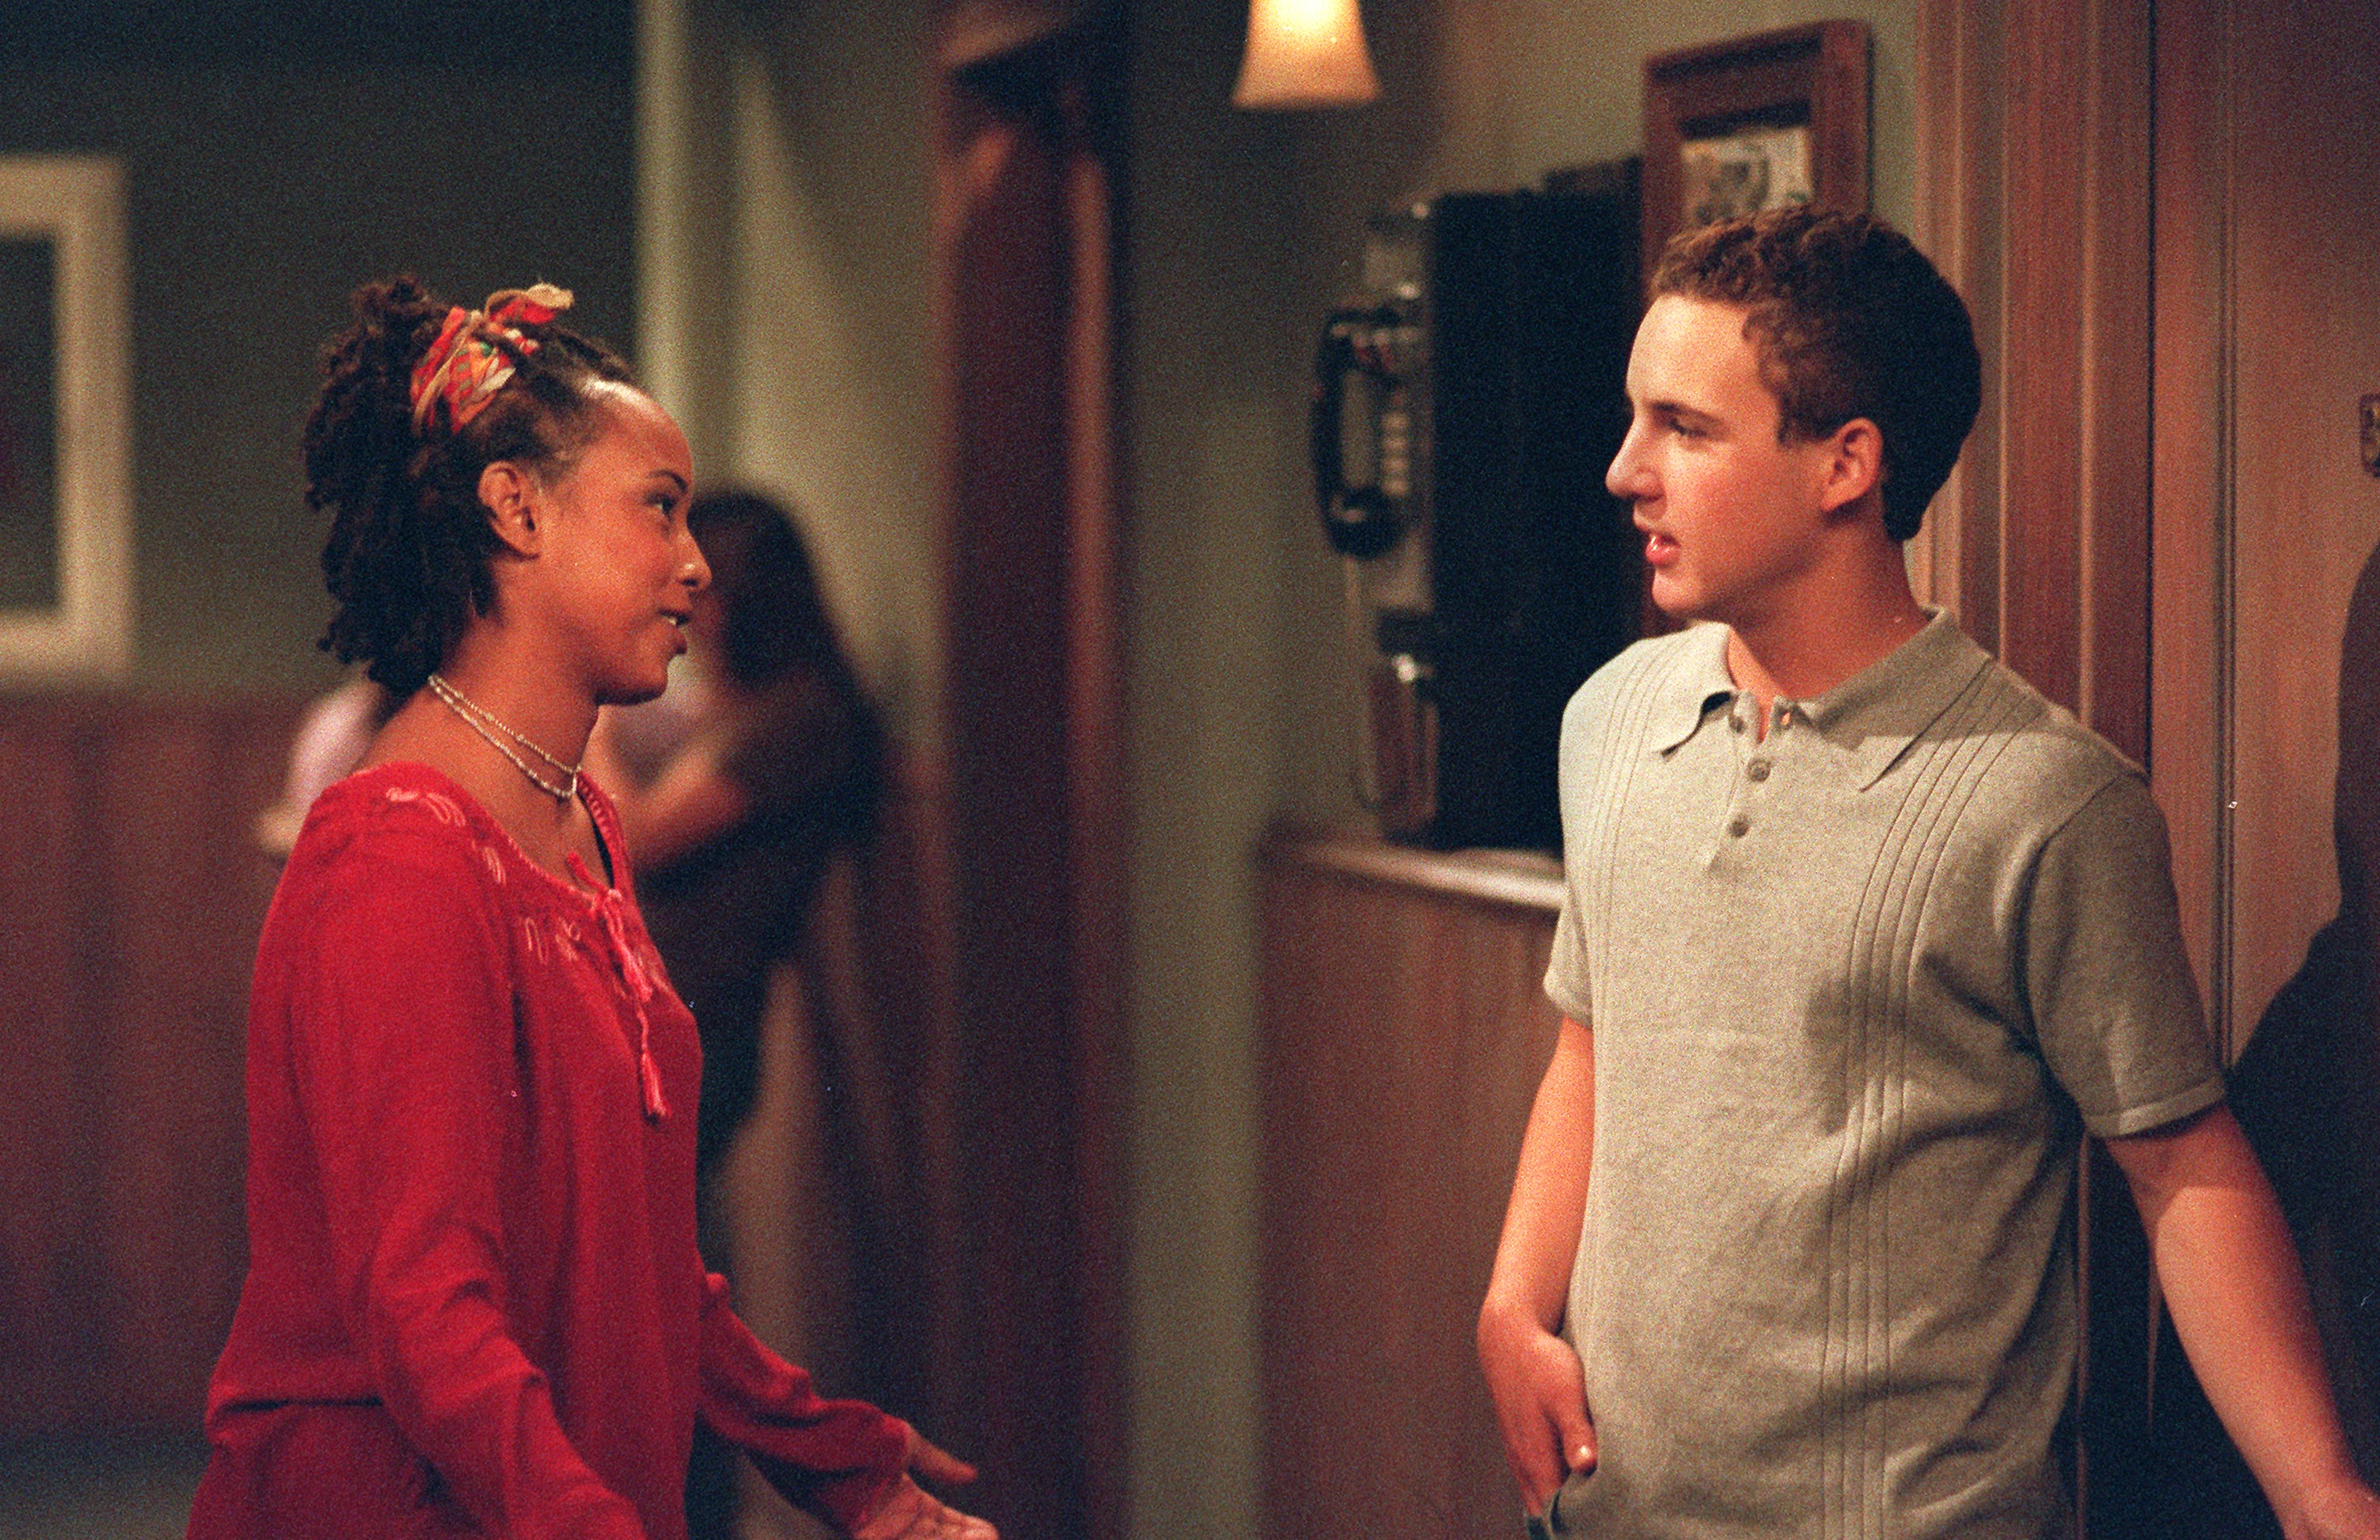 Trina McGee and Ben Savage in a still-image of an episode of Boy Meets World that aired on October 16, 1998